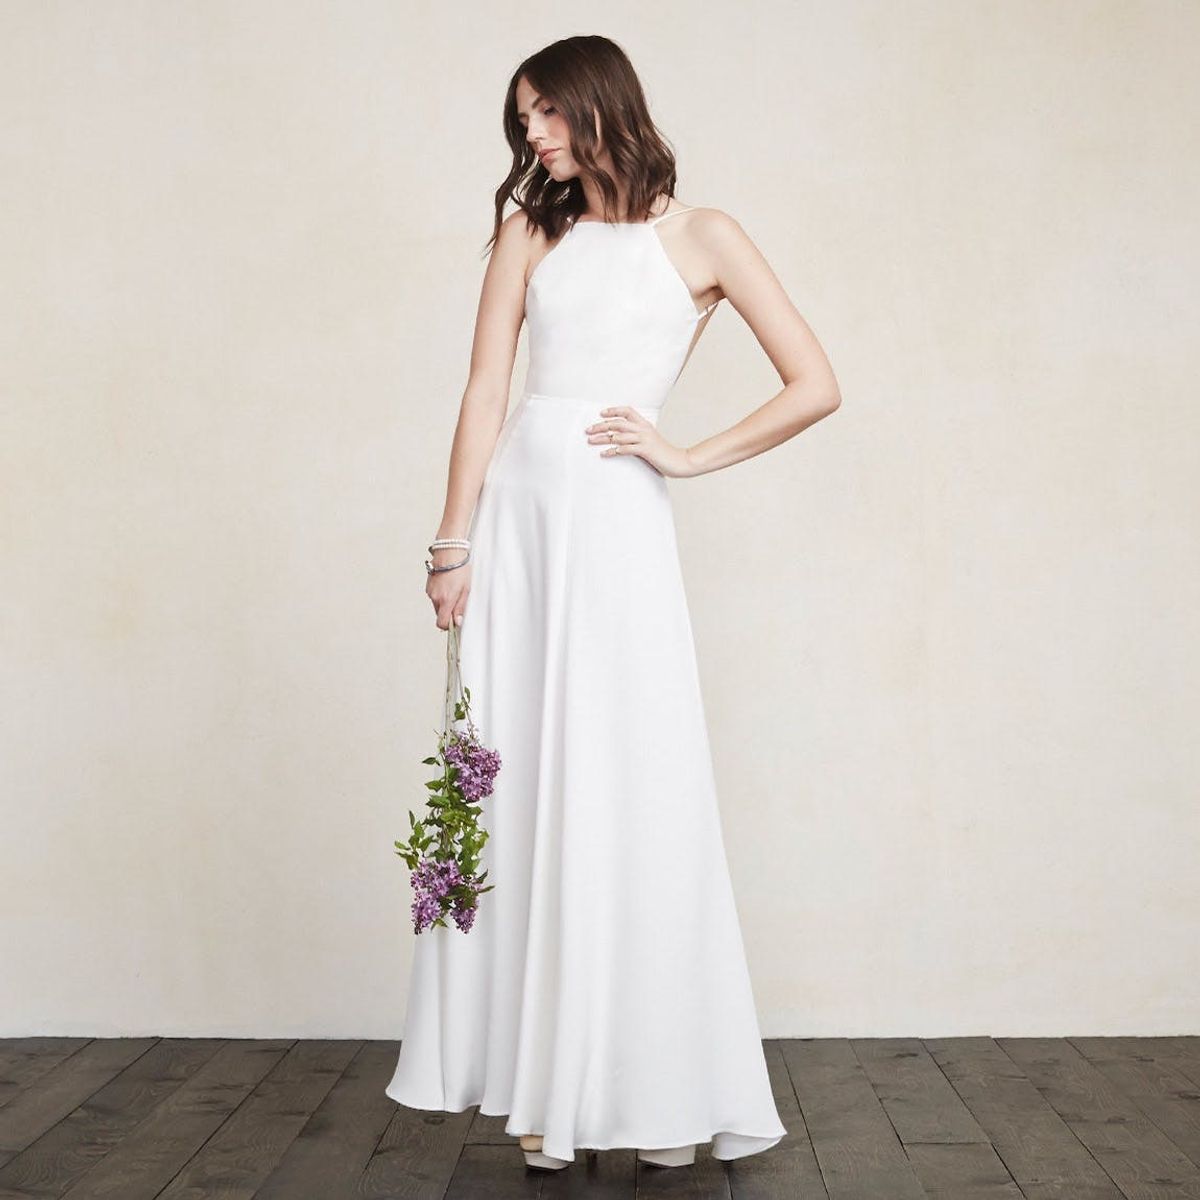 29 Non-Traditional Fall Wedding Dresses for the Modern Bride